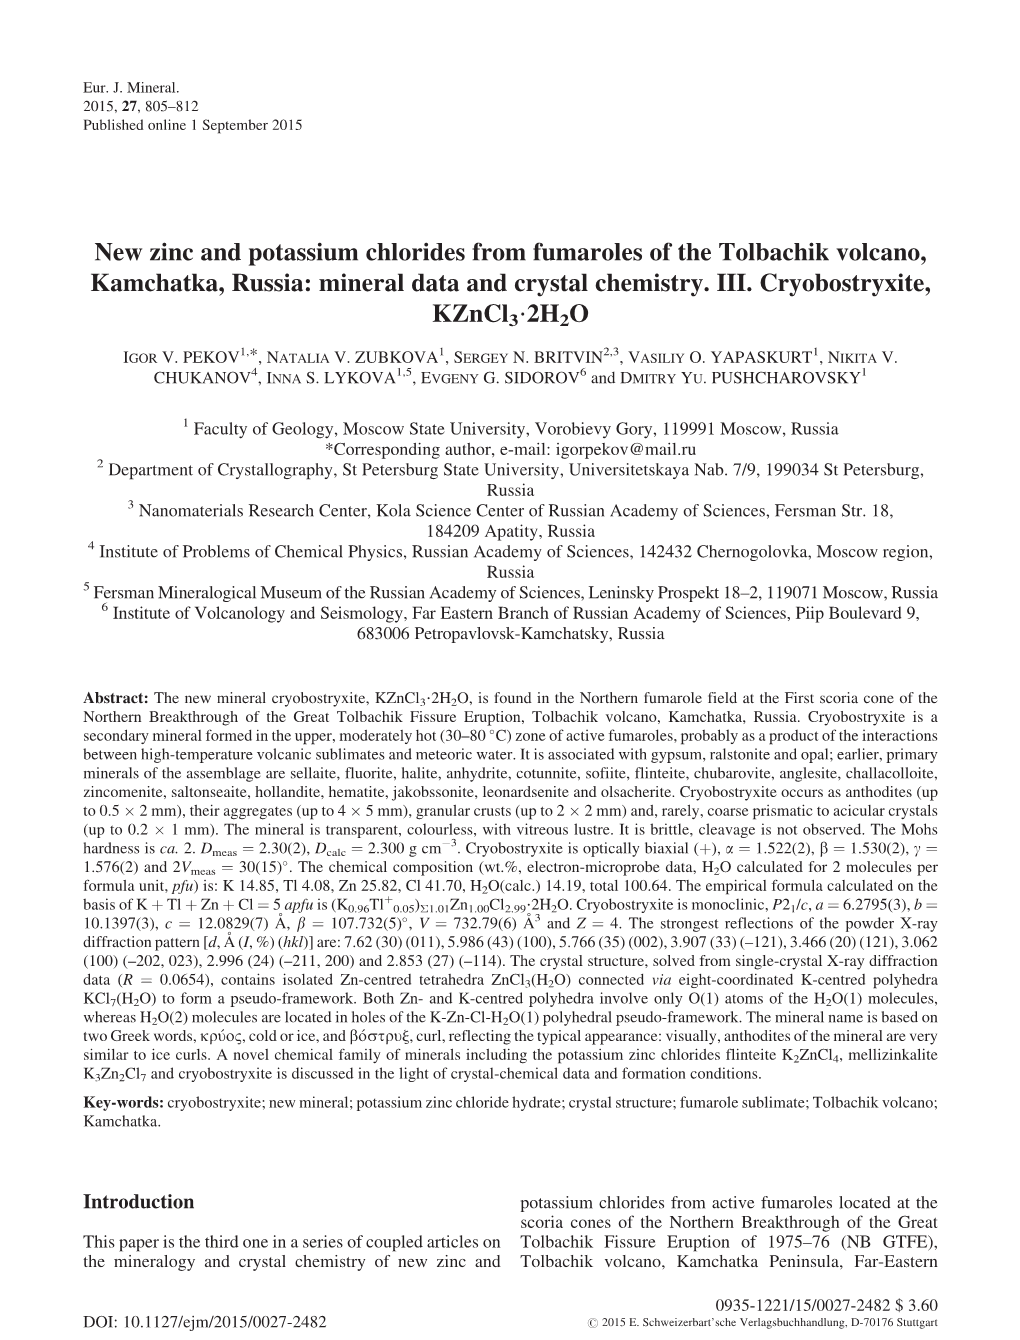 New Zinc and Potassium Chlorides from Fumaroles of the Tolbachik Volcano, Kamchatka, Russia: Mineral Data and Crystal Chemistry